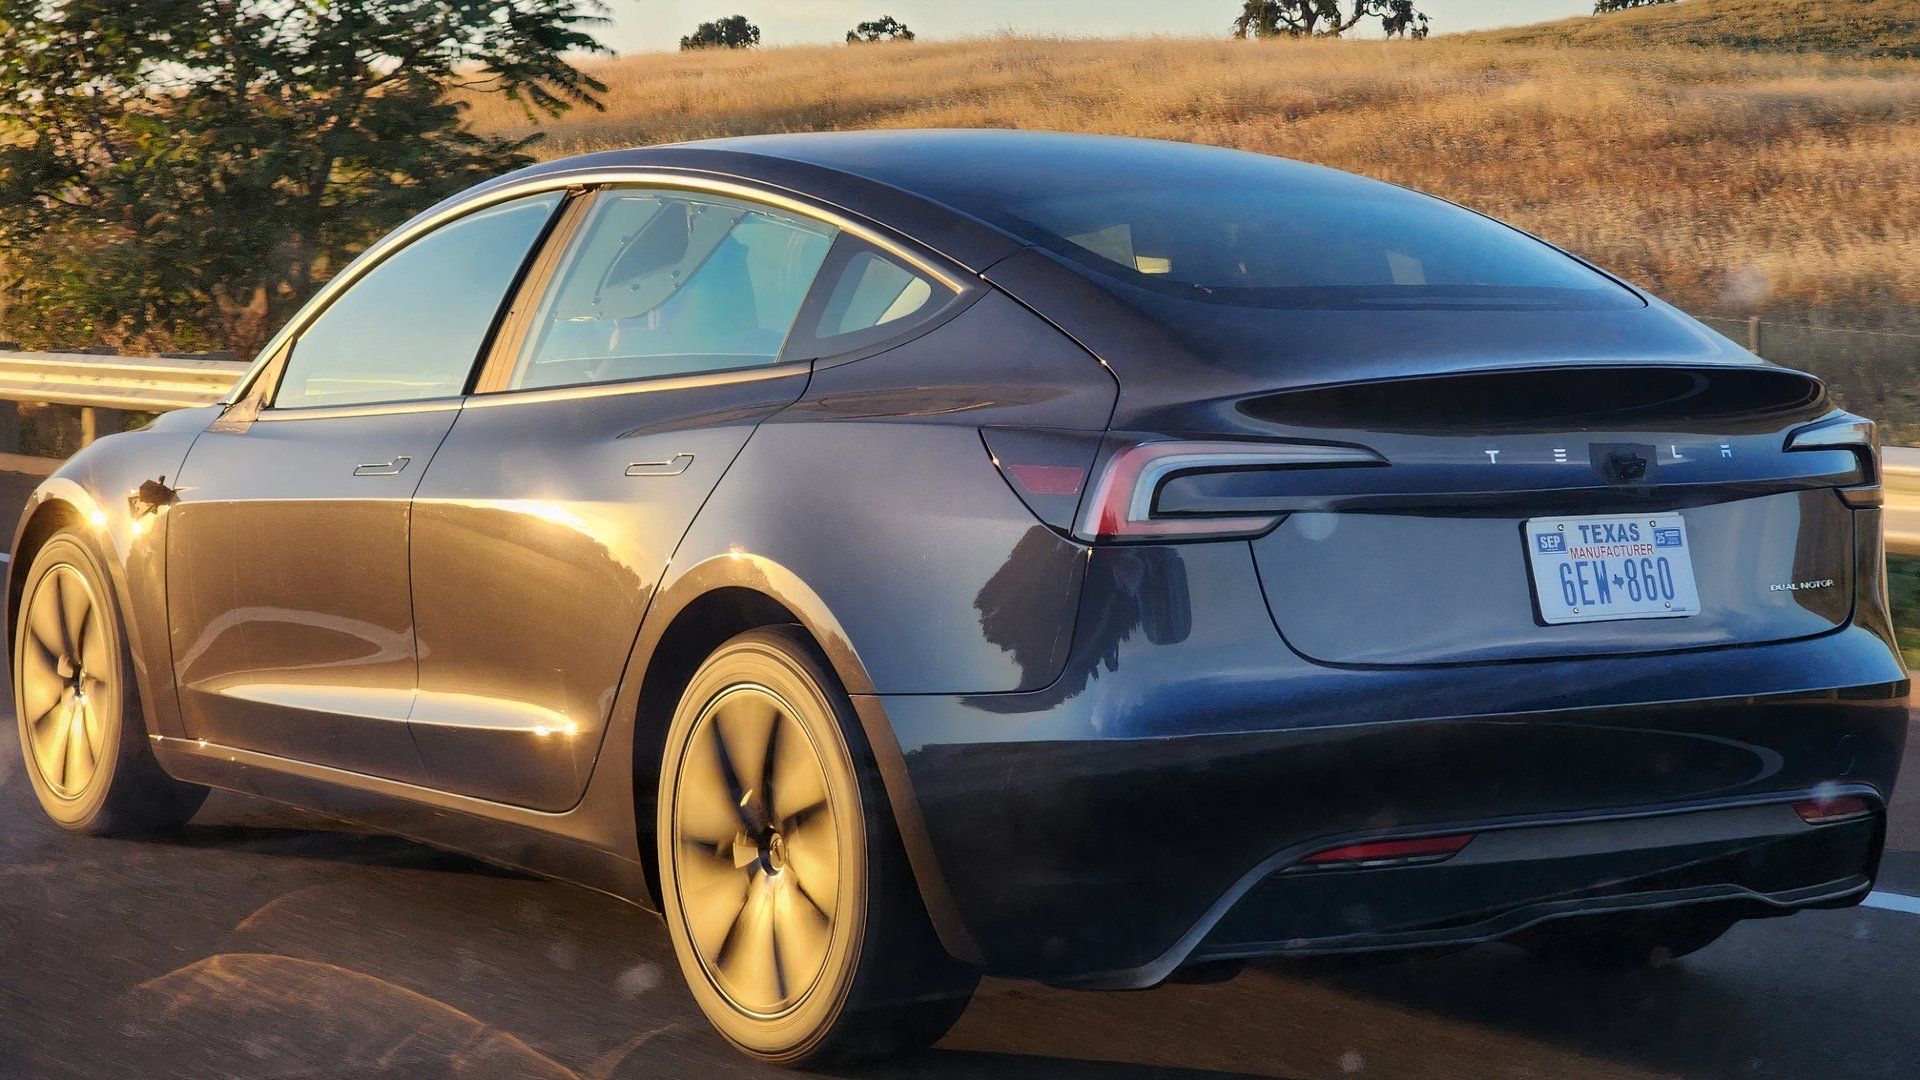 Tesla Model 3 Using Cameras Instead Of Side Mirrors Is A Bit Of A Mystery